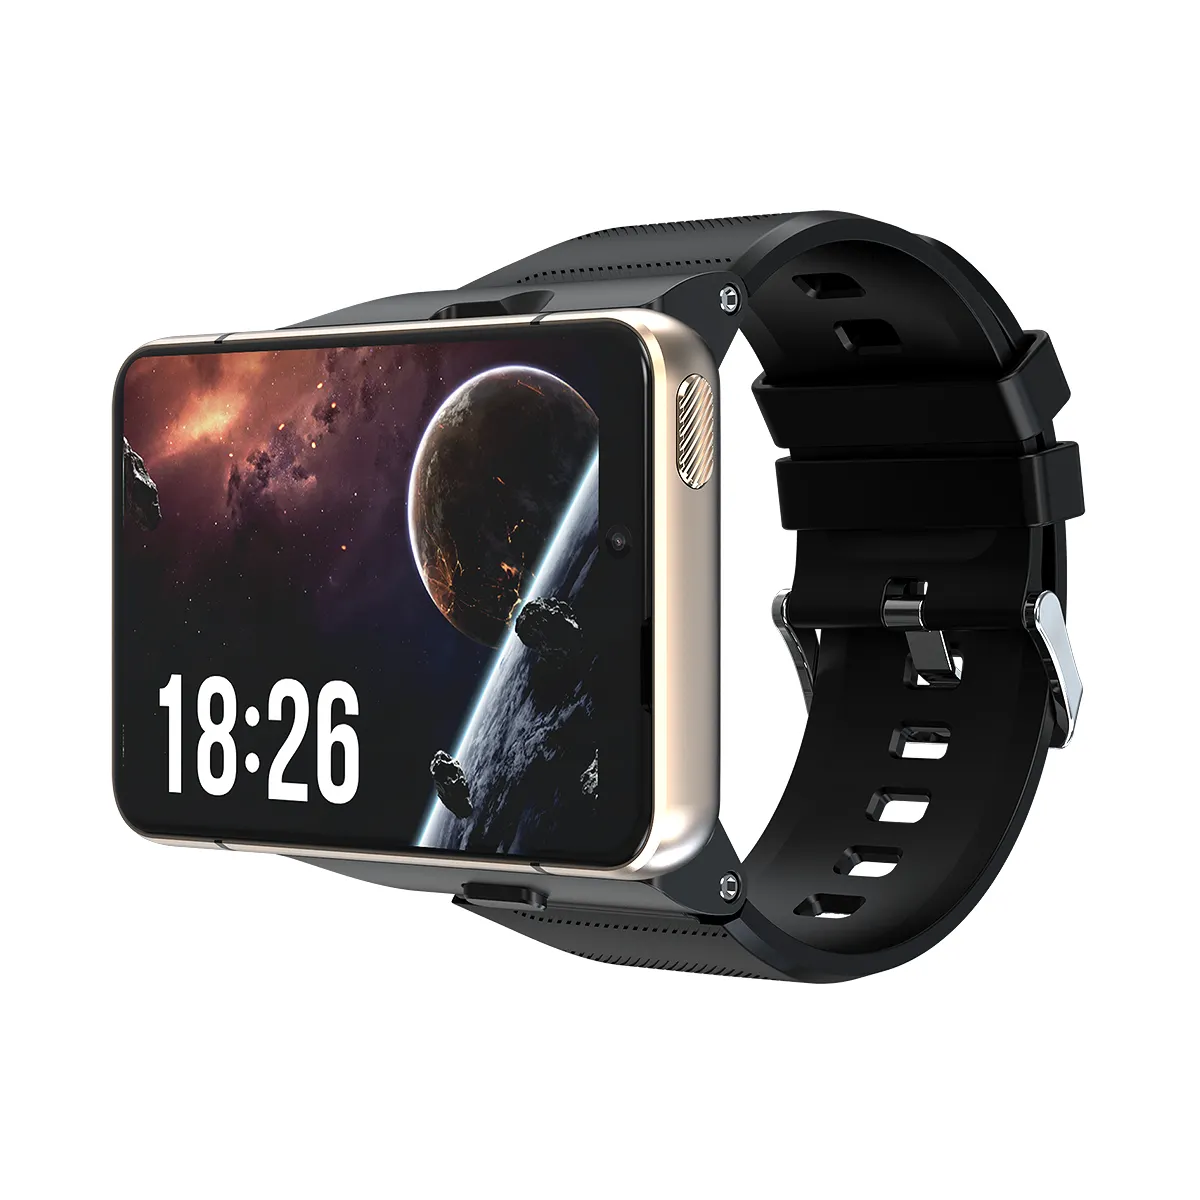 4G Video Call Function Smart Watch S999 Sim Card Android Wifi Dual Camera 2300mAh Long Battery Smart Watch With Gps